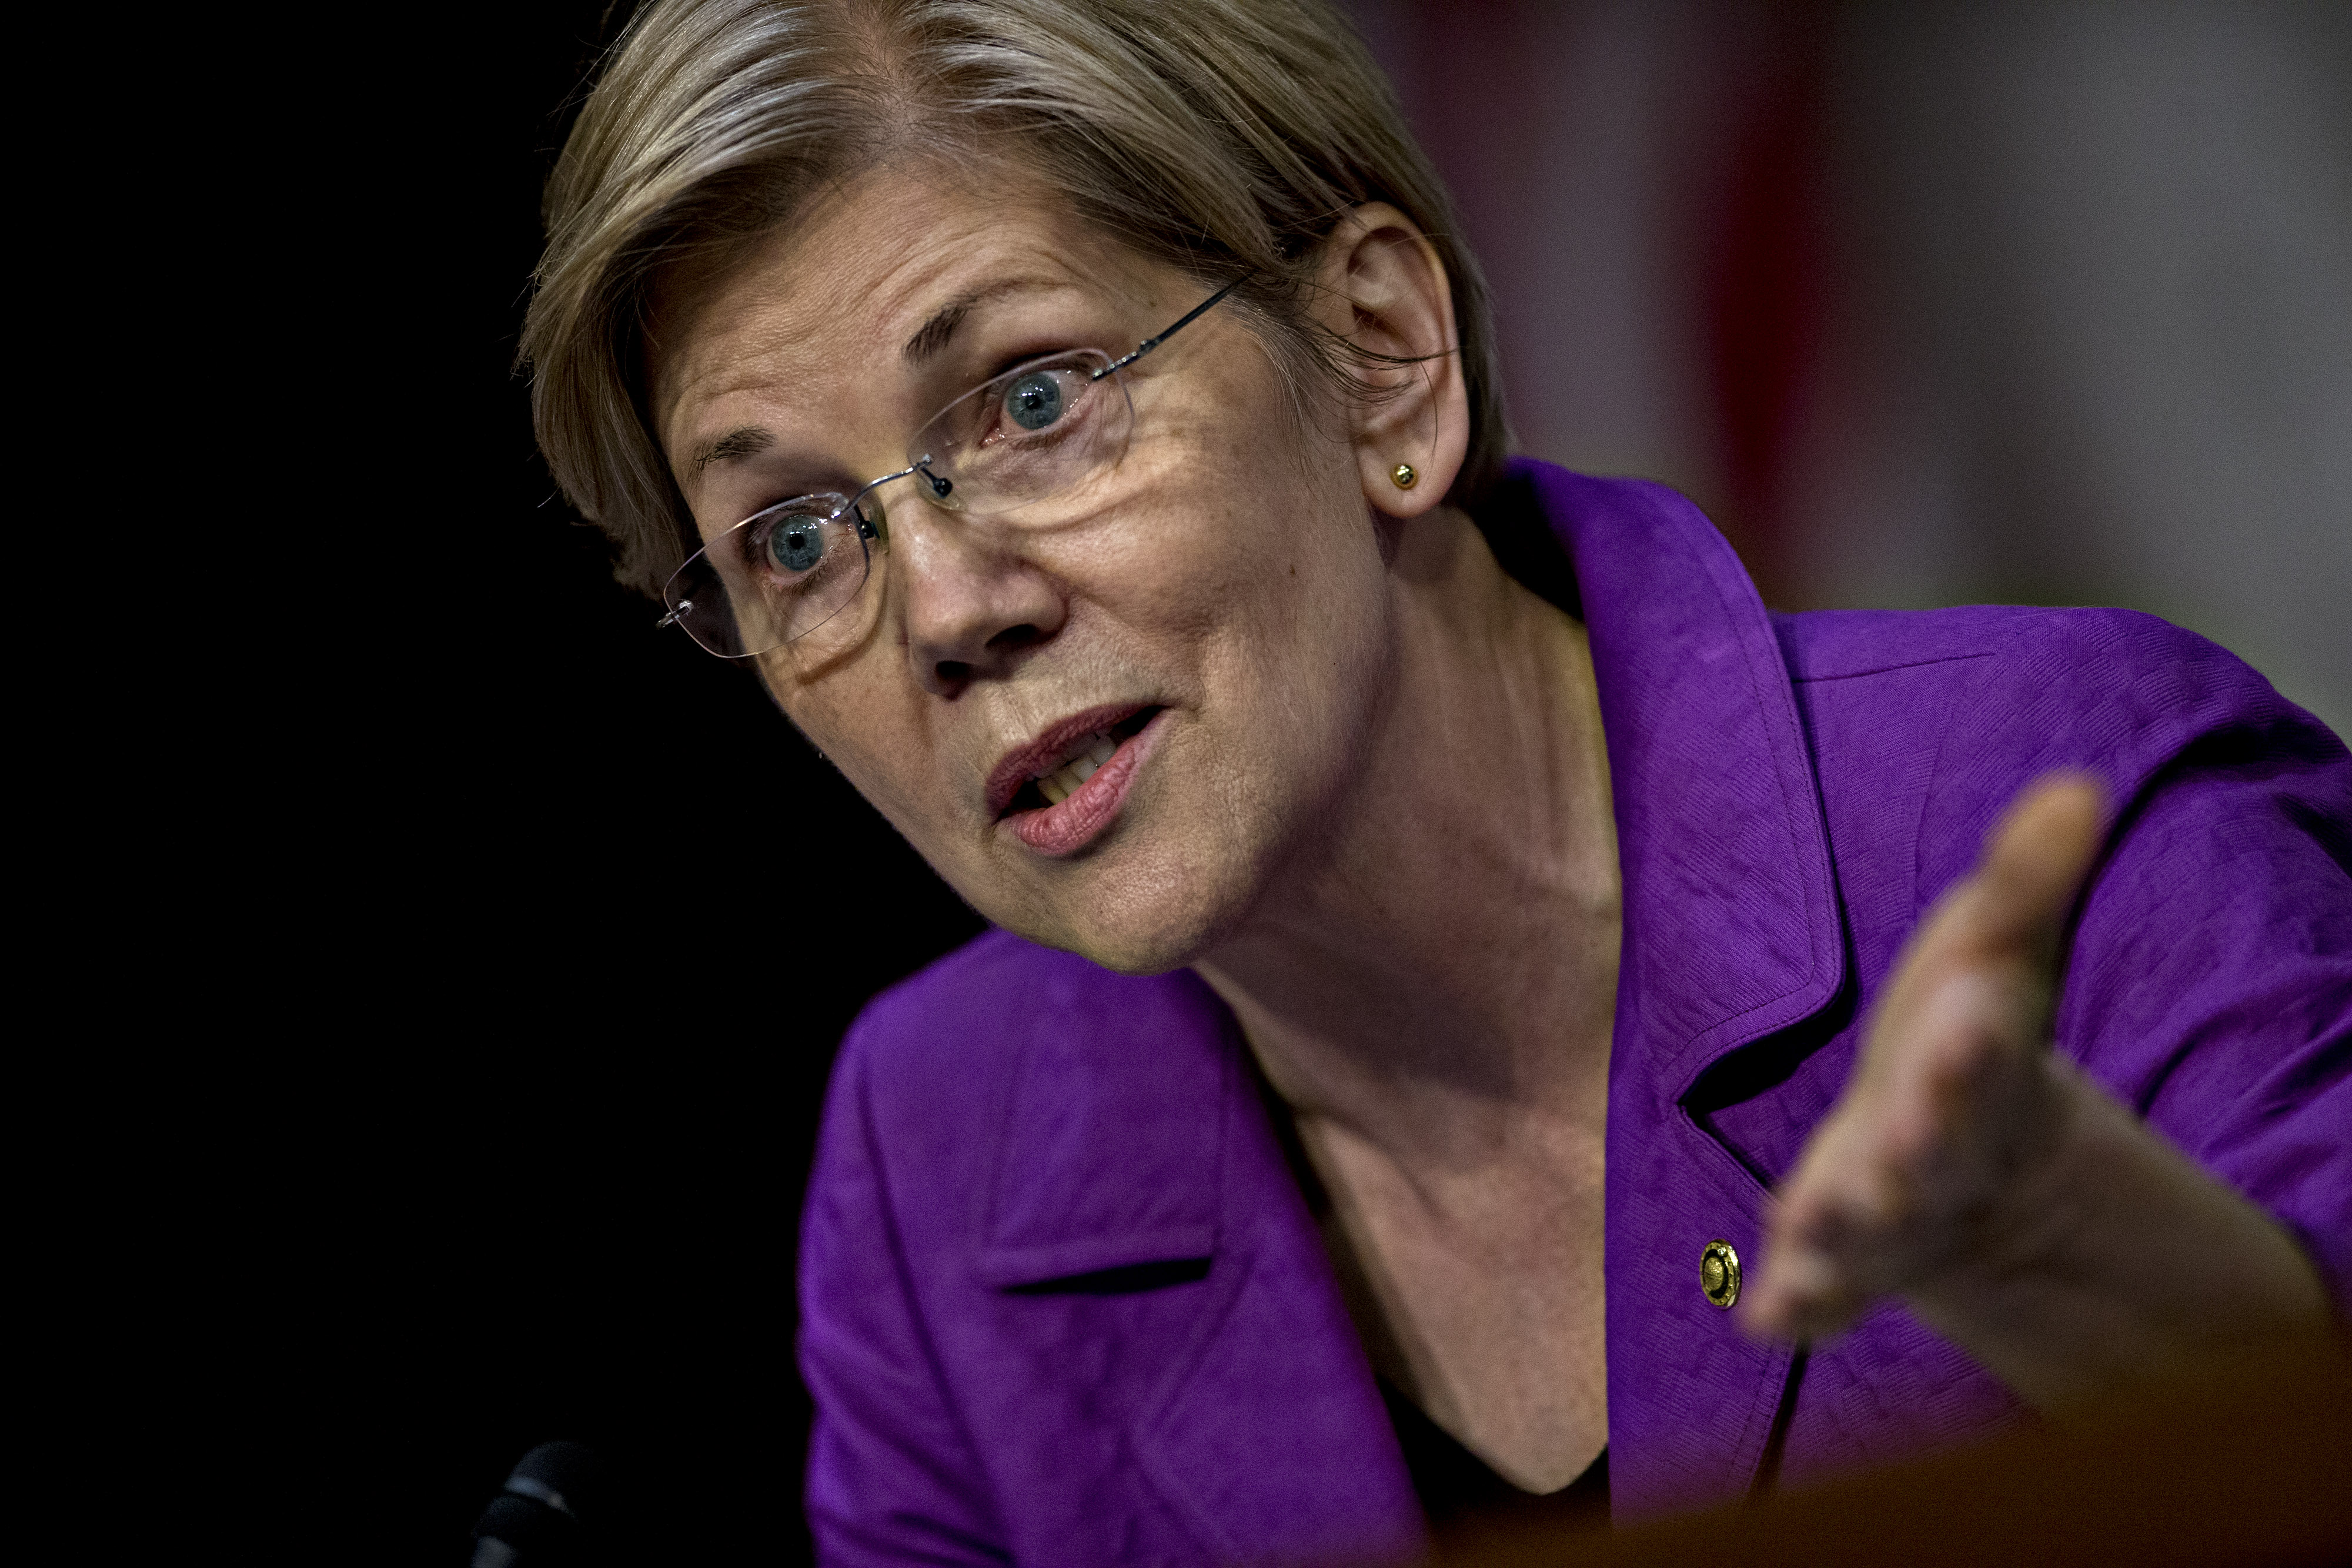 Senator Elizabeth Warren, a Democrat from Massachusetts, questions witnesses during a Senate Special Committee on Aging hearing on Valeant Pharmaceuticals in Washington on April 27. (Andrew Harrer—Bloomberg/Getty Images)